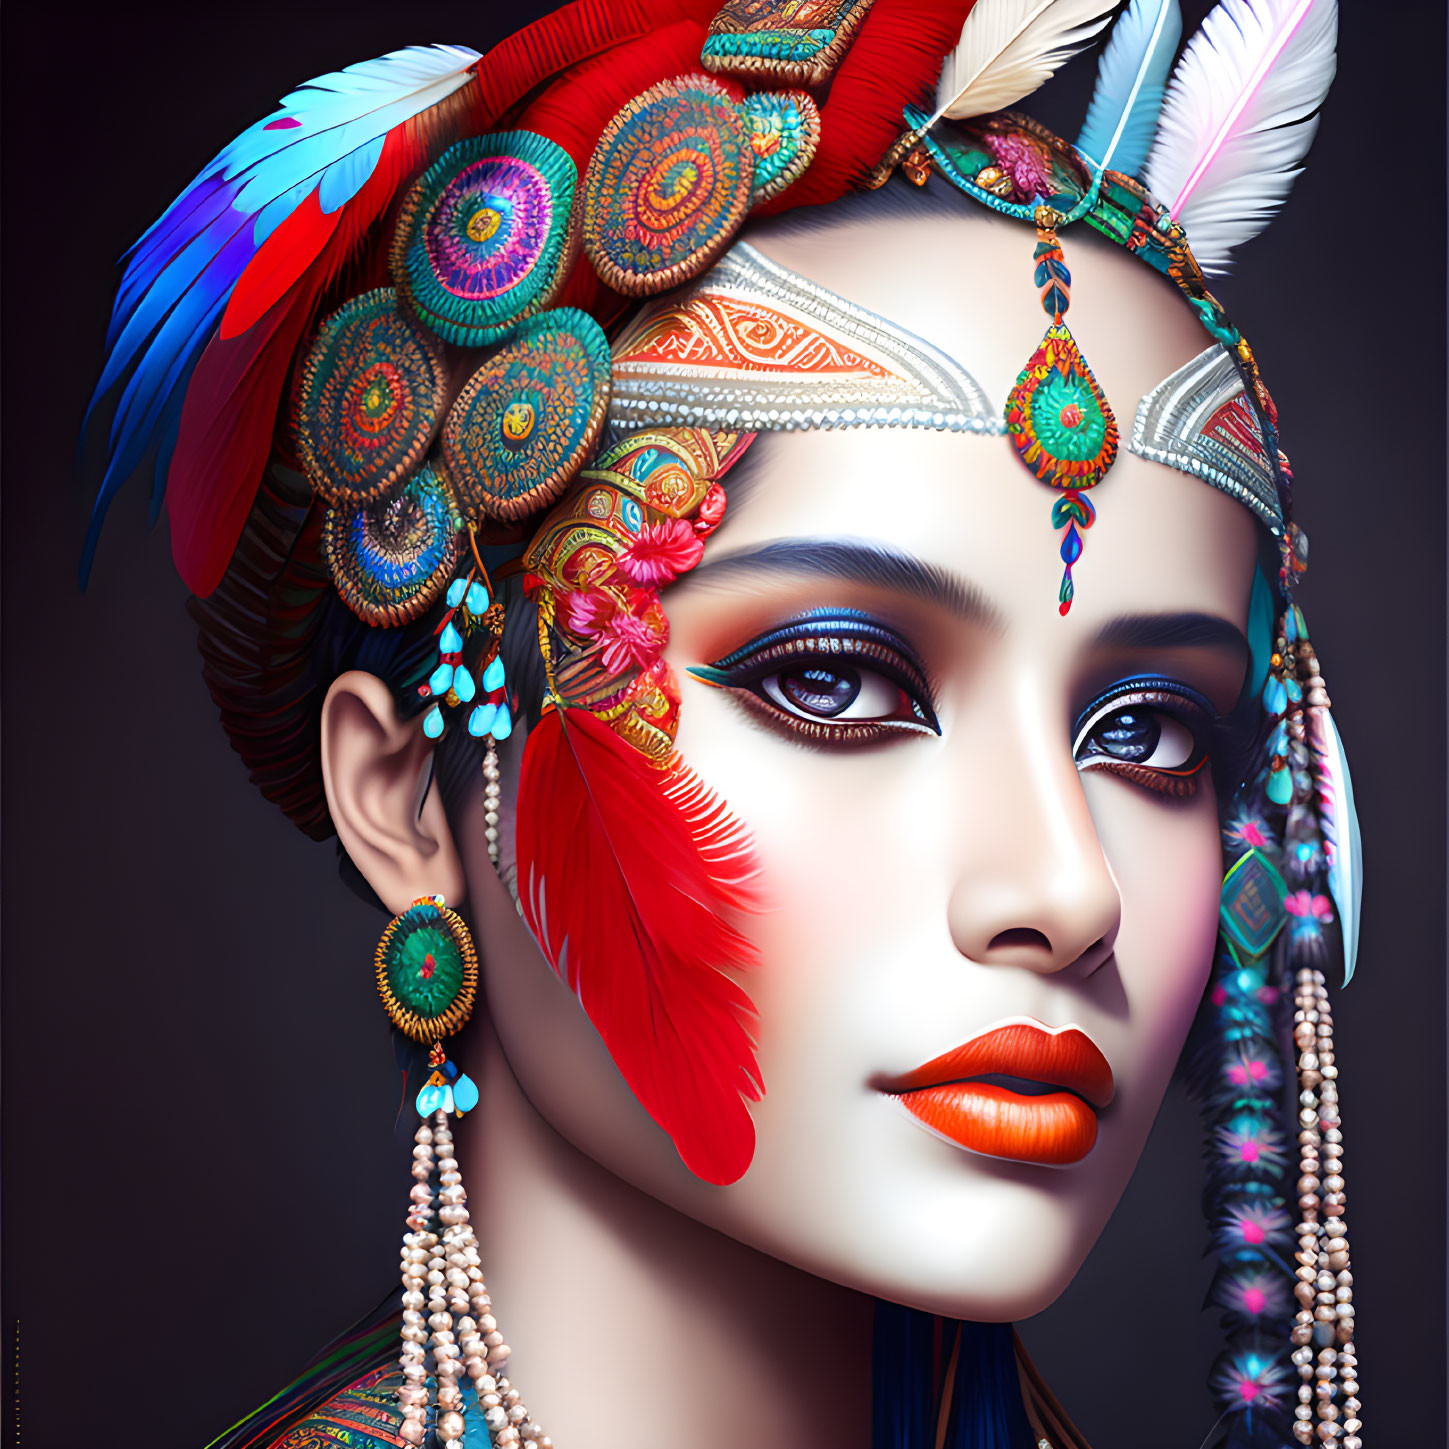 Digital artwork features woman in vibrant feathered headdress and cultural motifs